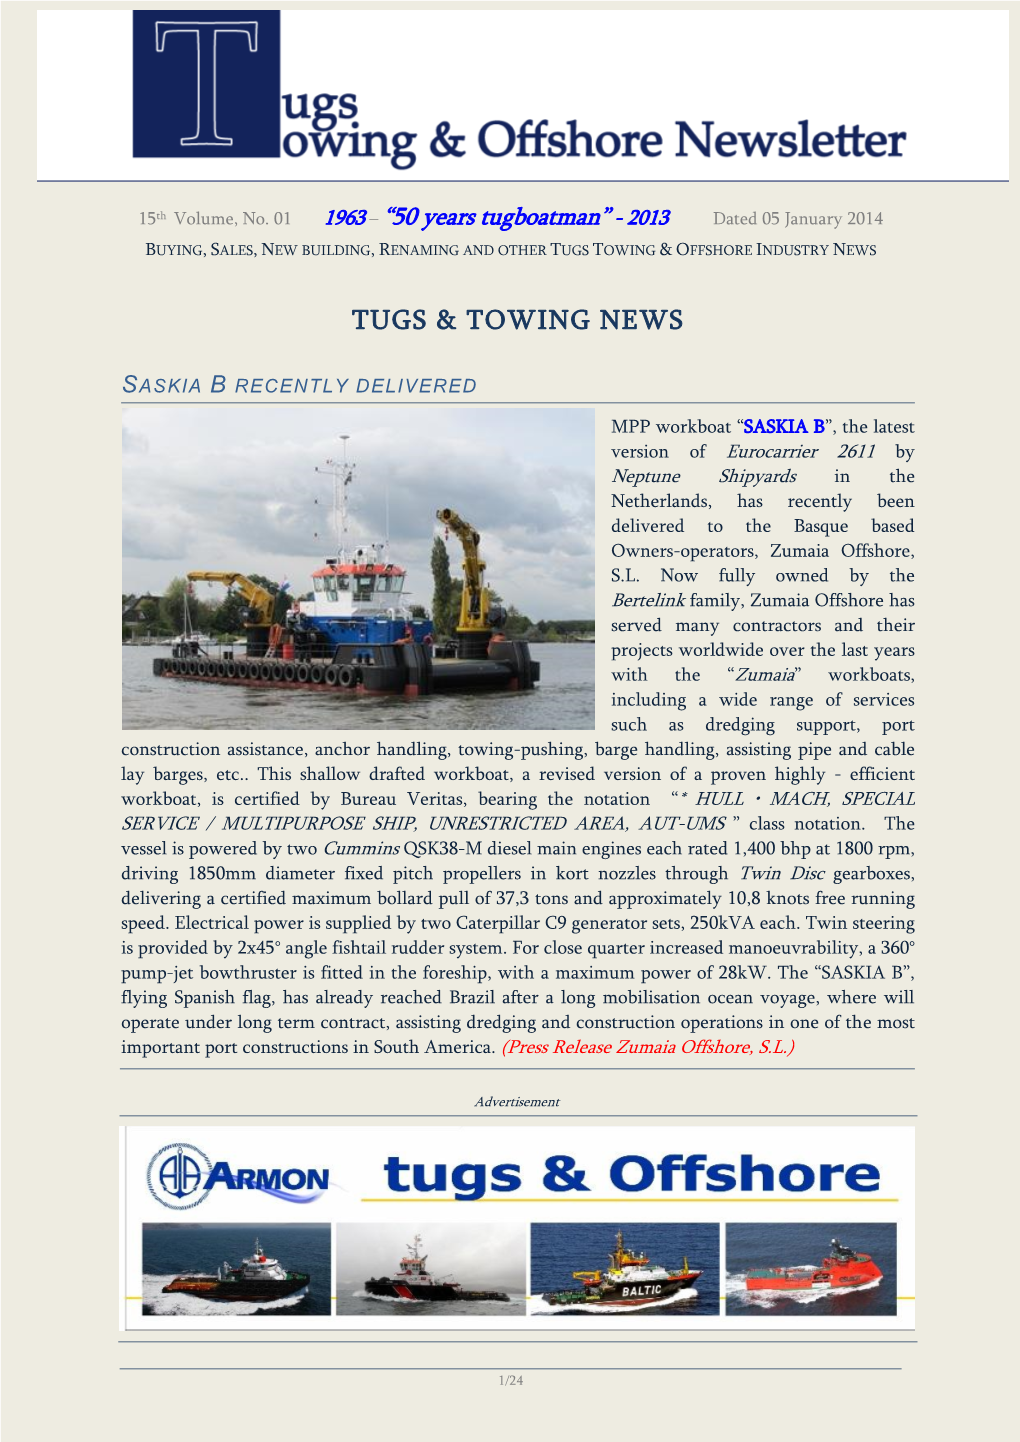 50 Years Tugboatman” - 2013 Dated 05 January 2014 BUYING, SALES, NEW BUILDING, RENAMING and OTHER TUGS TOWING & OFFSHORE INDUSTRY NEWS